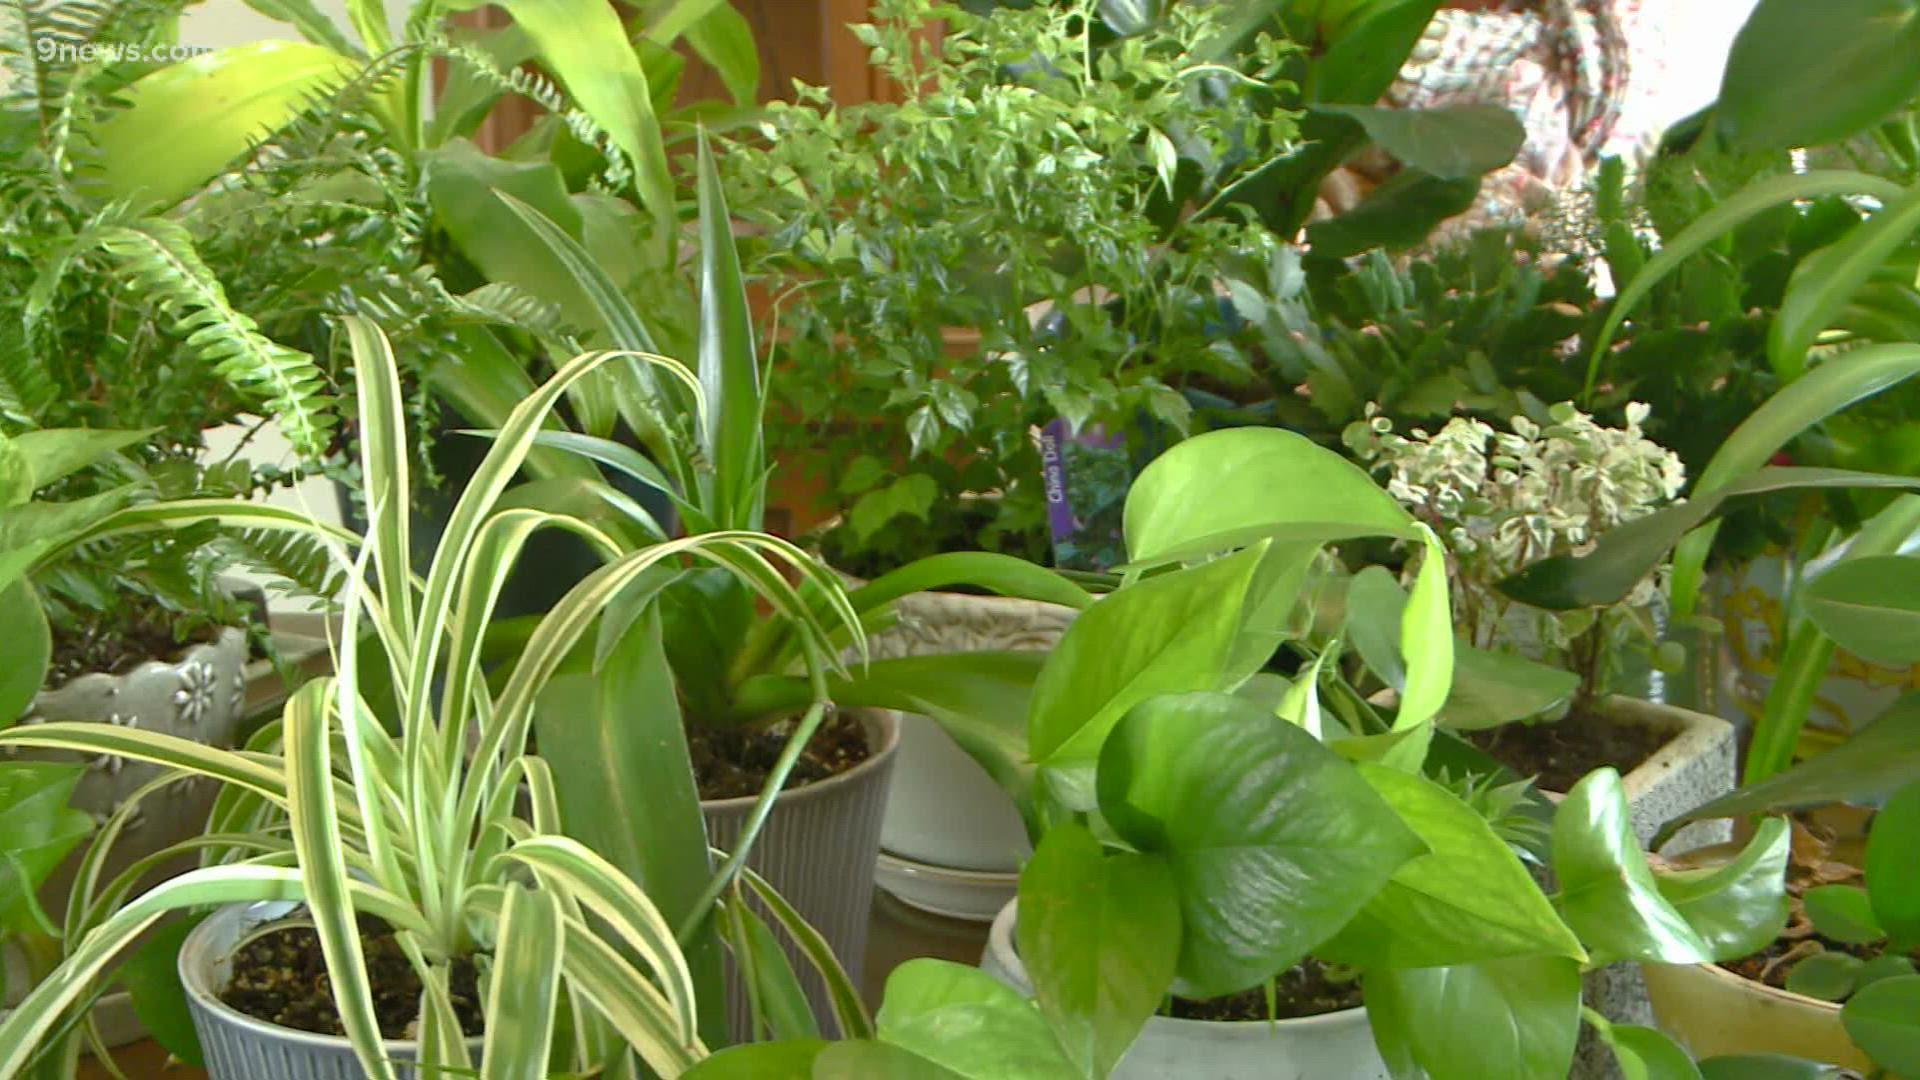 House plants beautify our personal spaces, improve air quality, and are therapeutic.